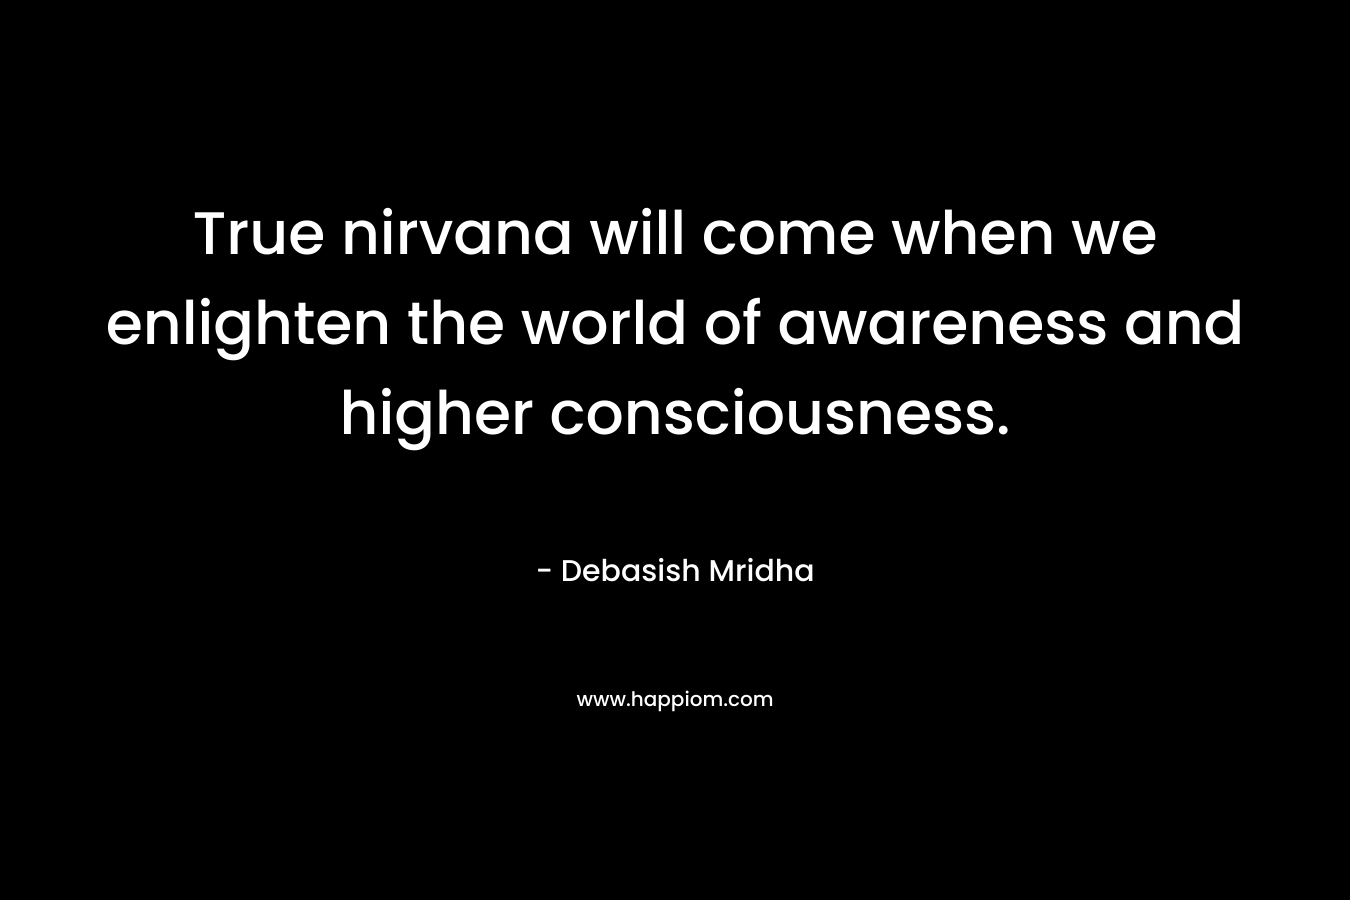 True nirvana will come when we enlighten the world of awareness and higher consciousness.